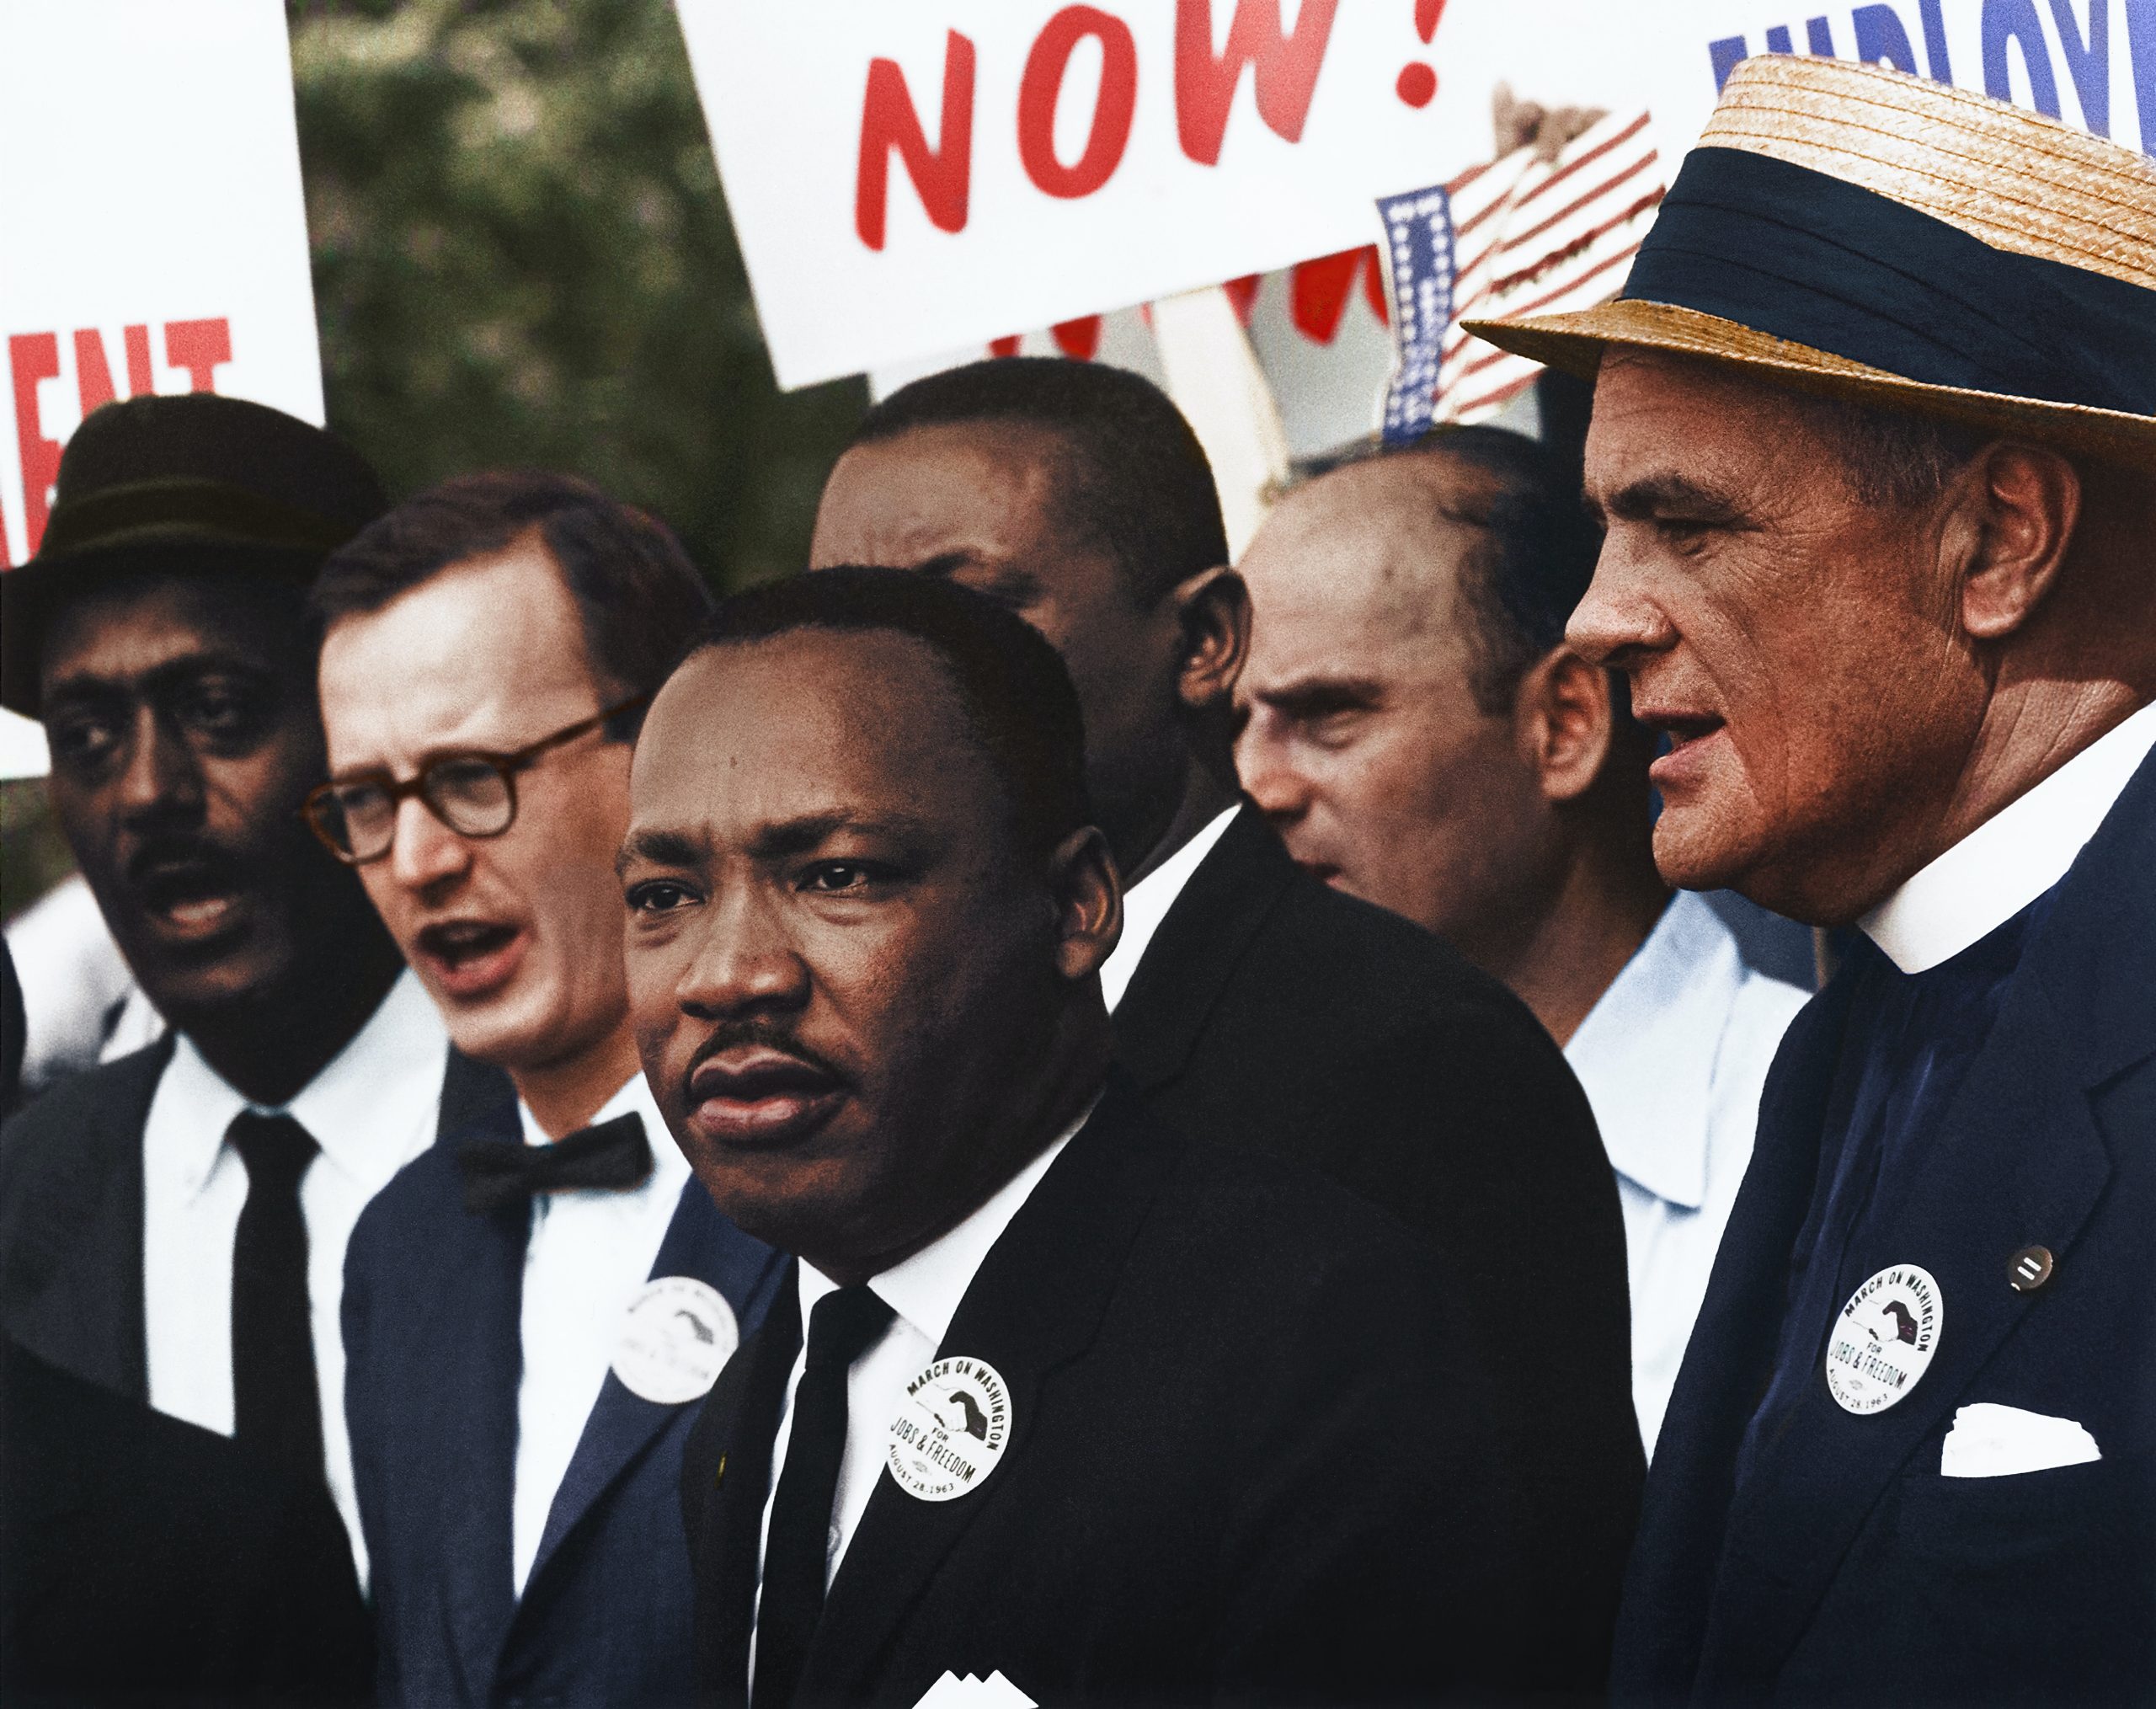 Martin Luther King, Jr. stands with a group of men holding signs in the 1963 March on Washington.